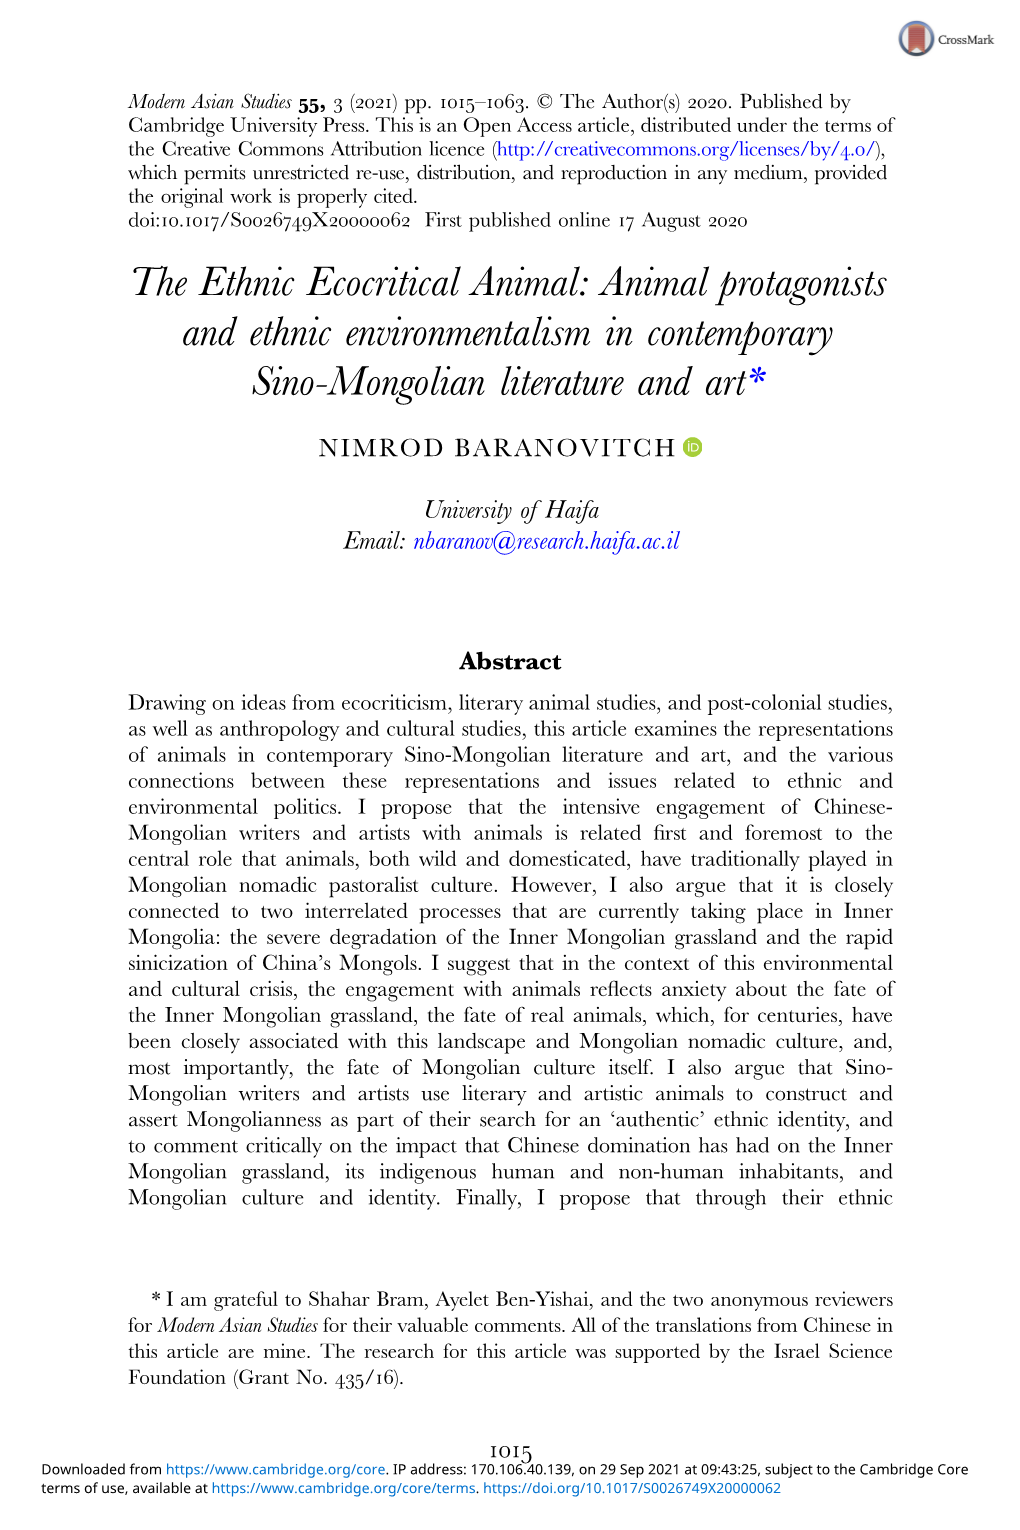 Animal Protagonists and Ethnic Environmentalism in Contemporary Sino-Mongolian Literature and Art*